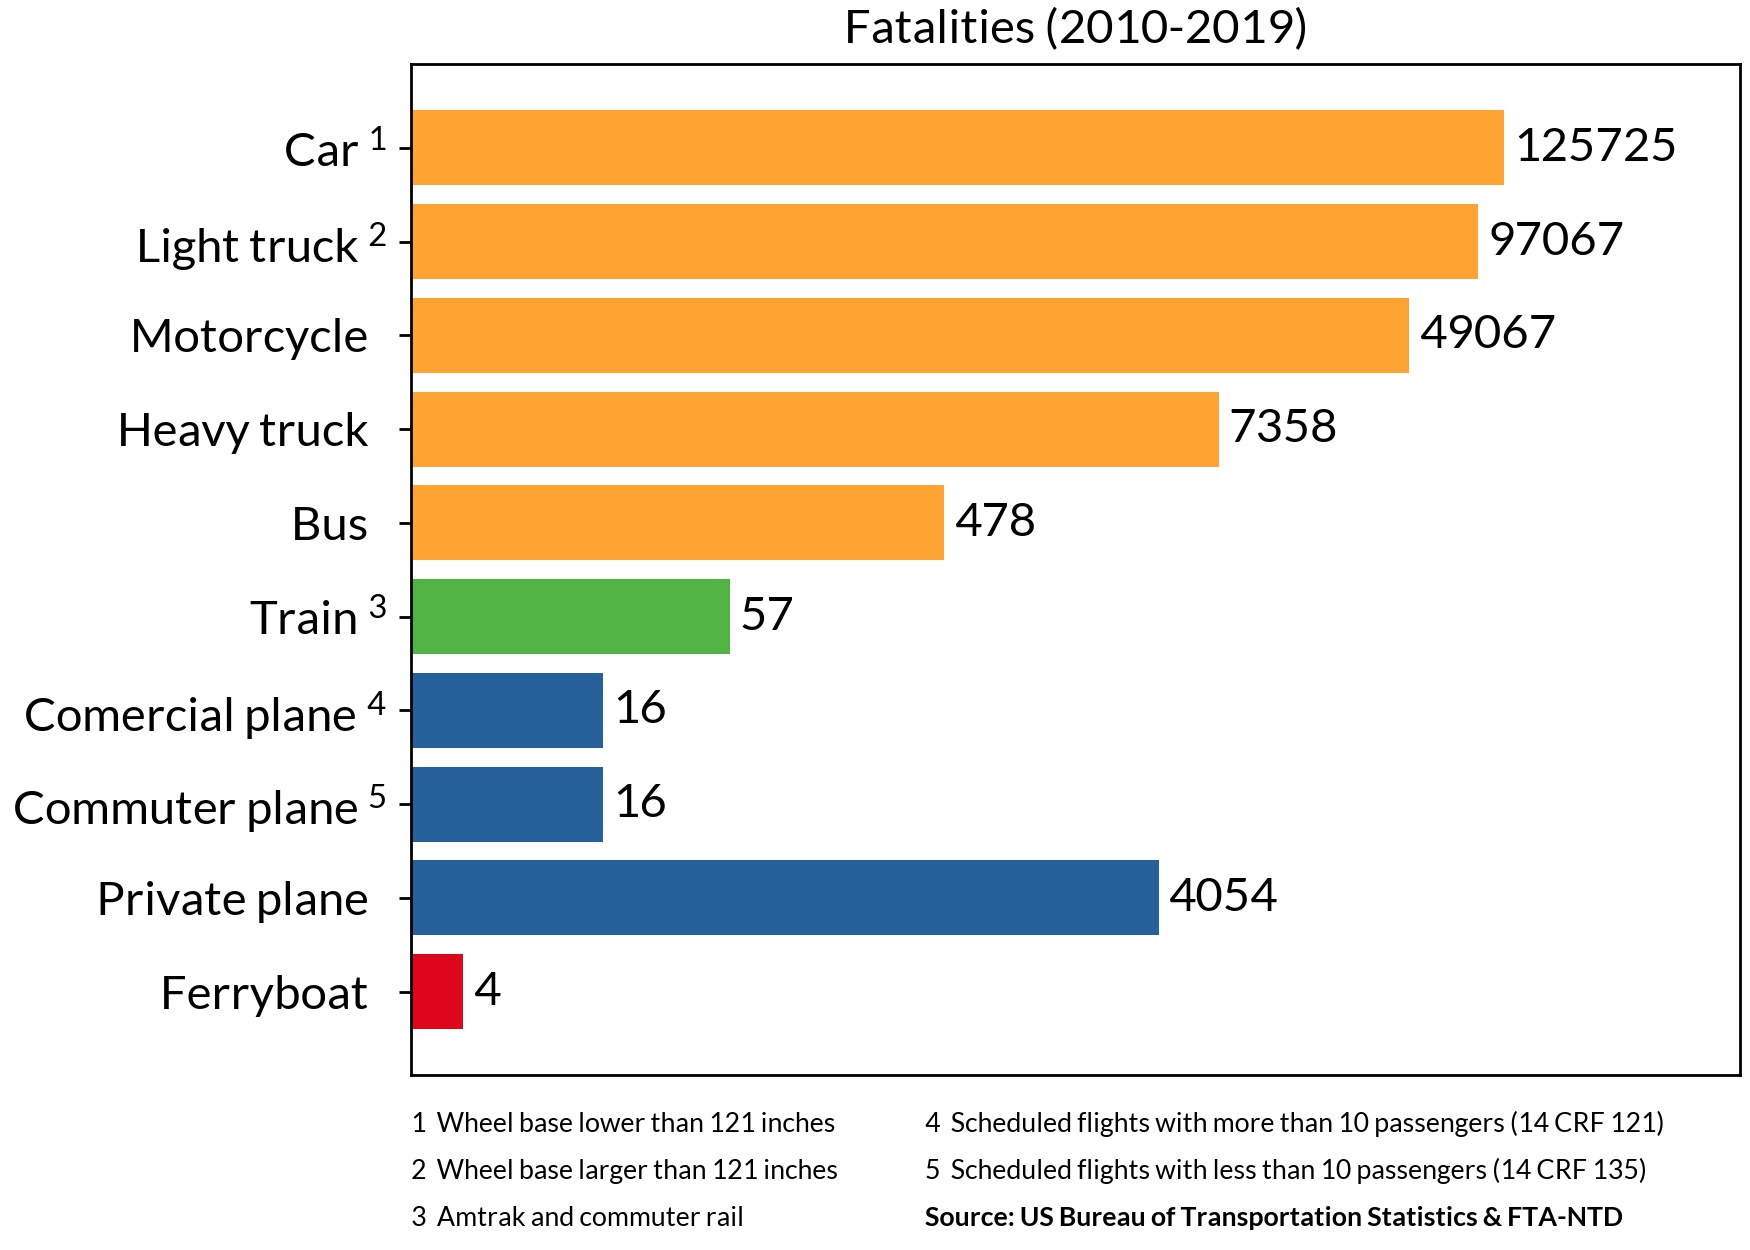 fatalities from different transportation modes between 2010-2019